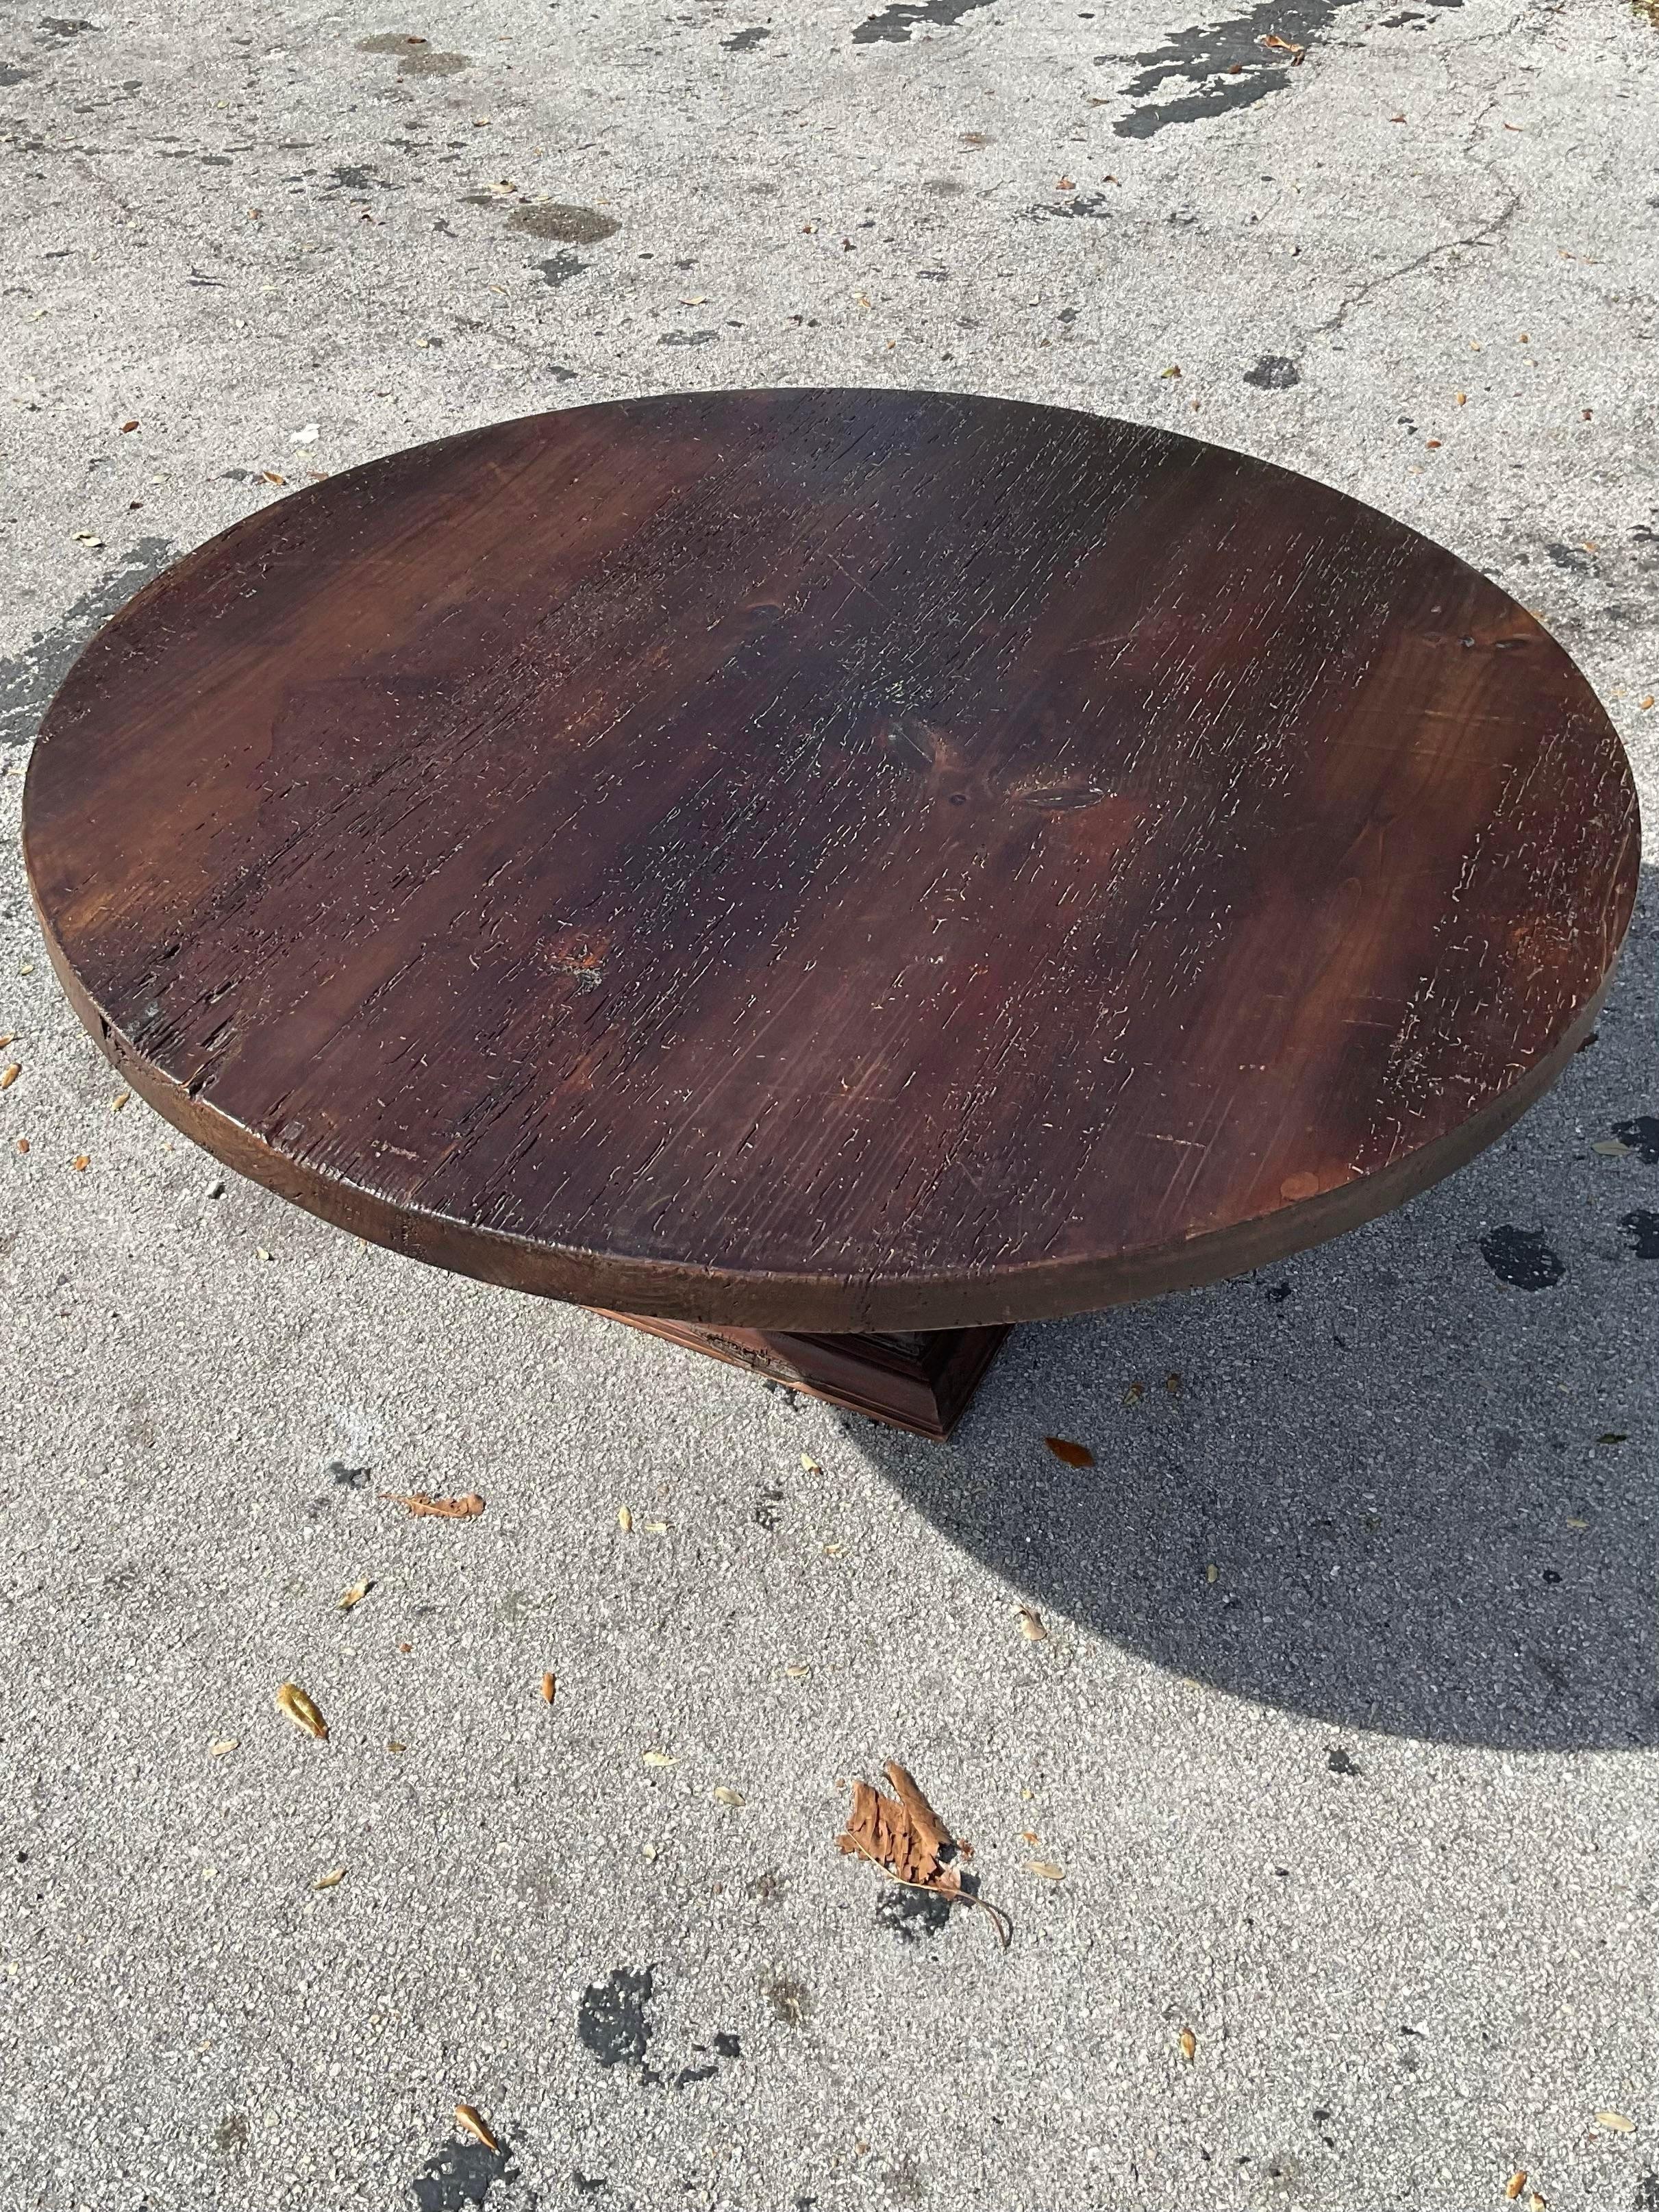 Gorgeous deep grain farm style round table. Height of the table lends itself to an entry center table at 28” however easily heightened to dining height. Incredibly rich dark stain on the open grain thick wood top, extremely elegant simple pedestal